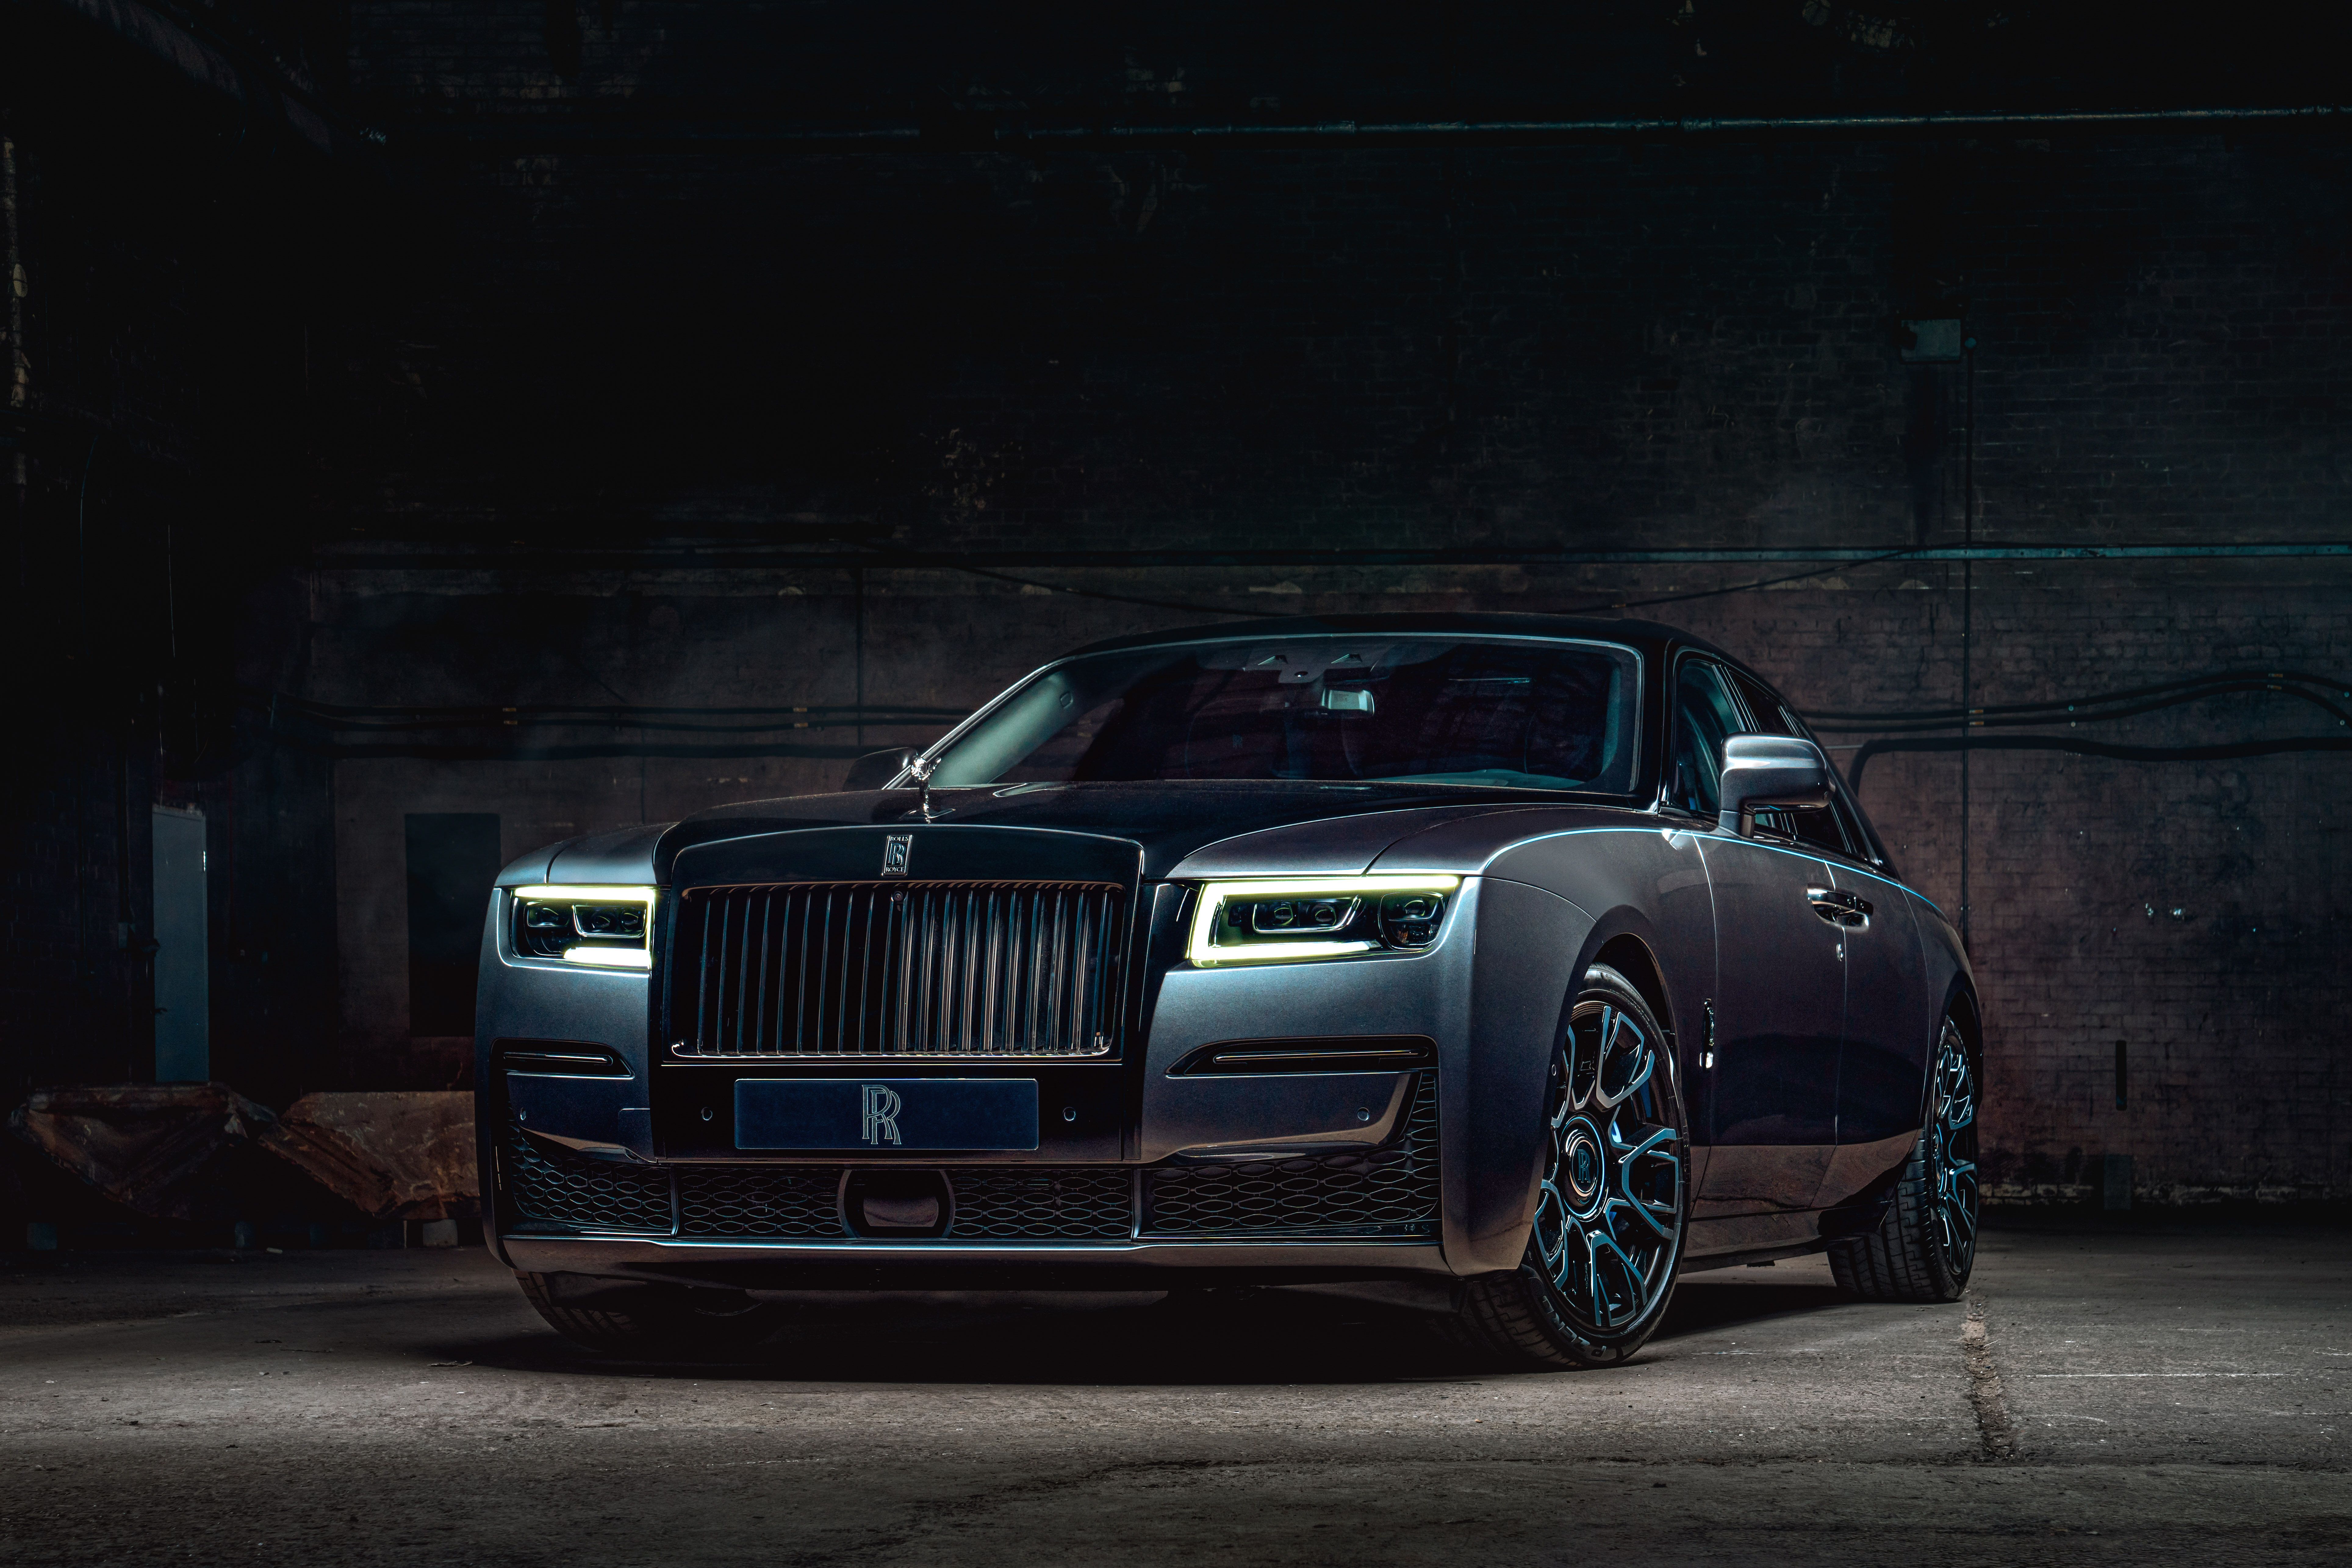 RollsRoyce Ghost Price in India  Images Mileage  Reviews  carandbike